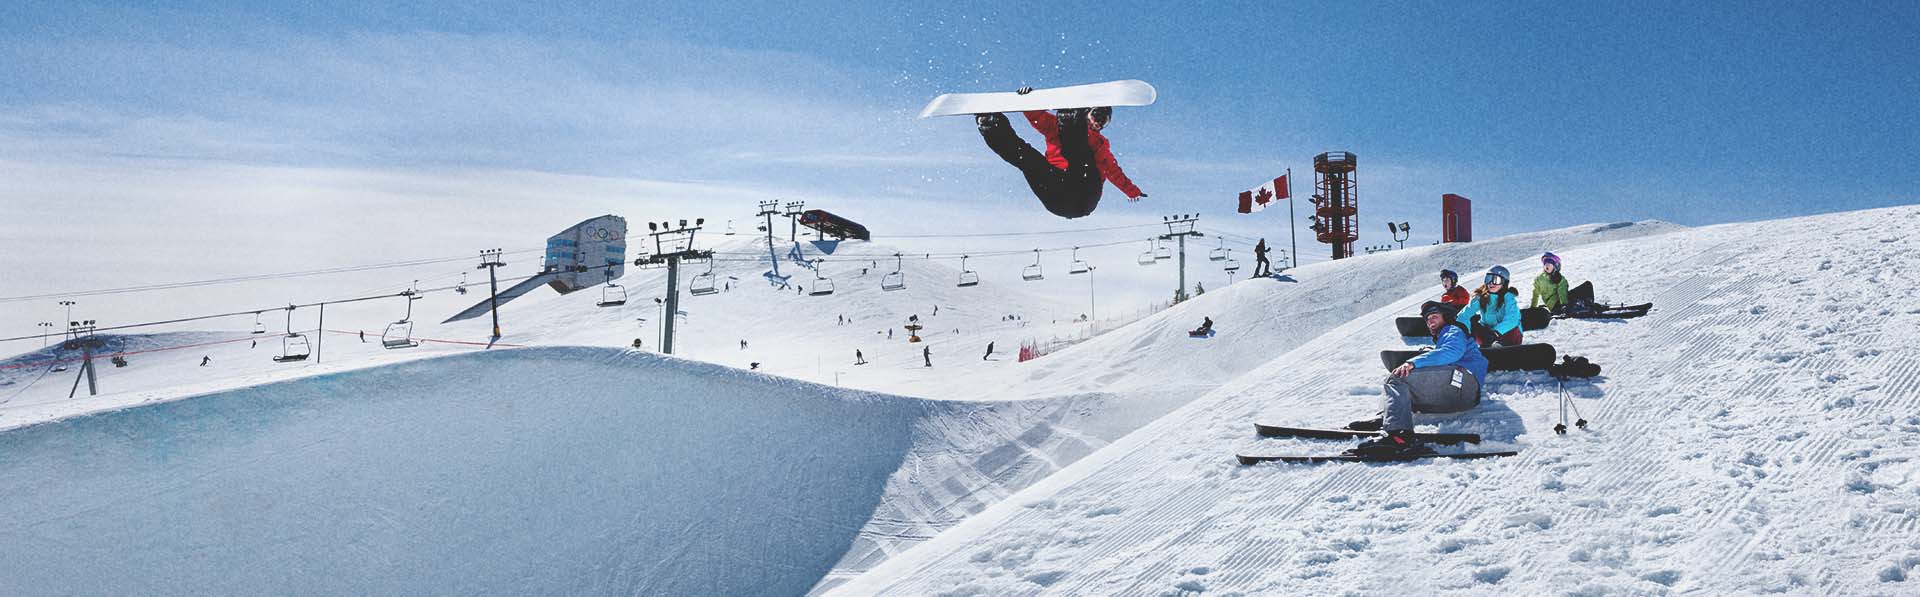 Skiers and Snowboarders at WinSport